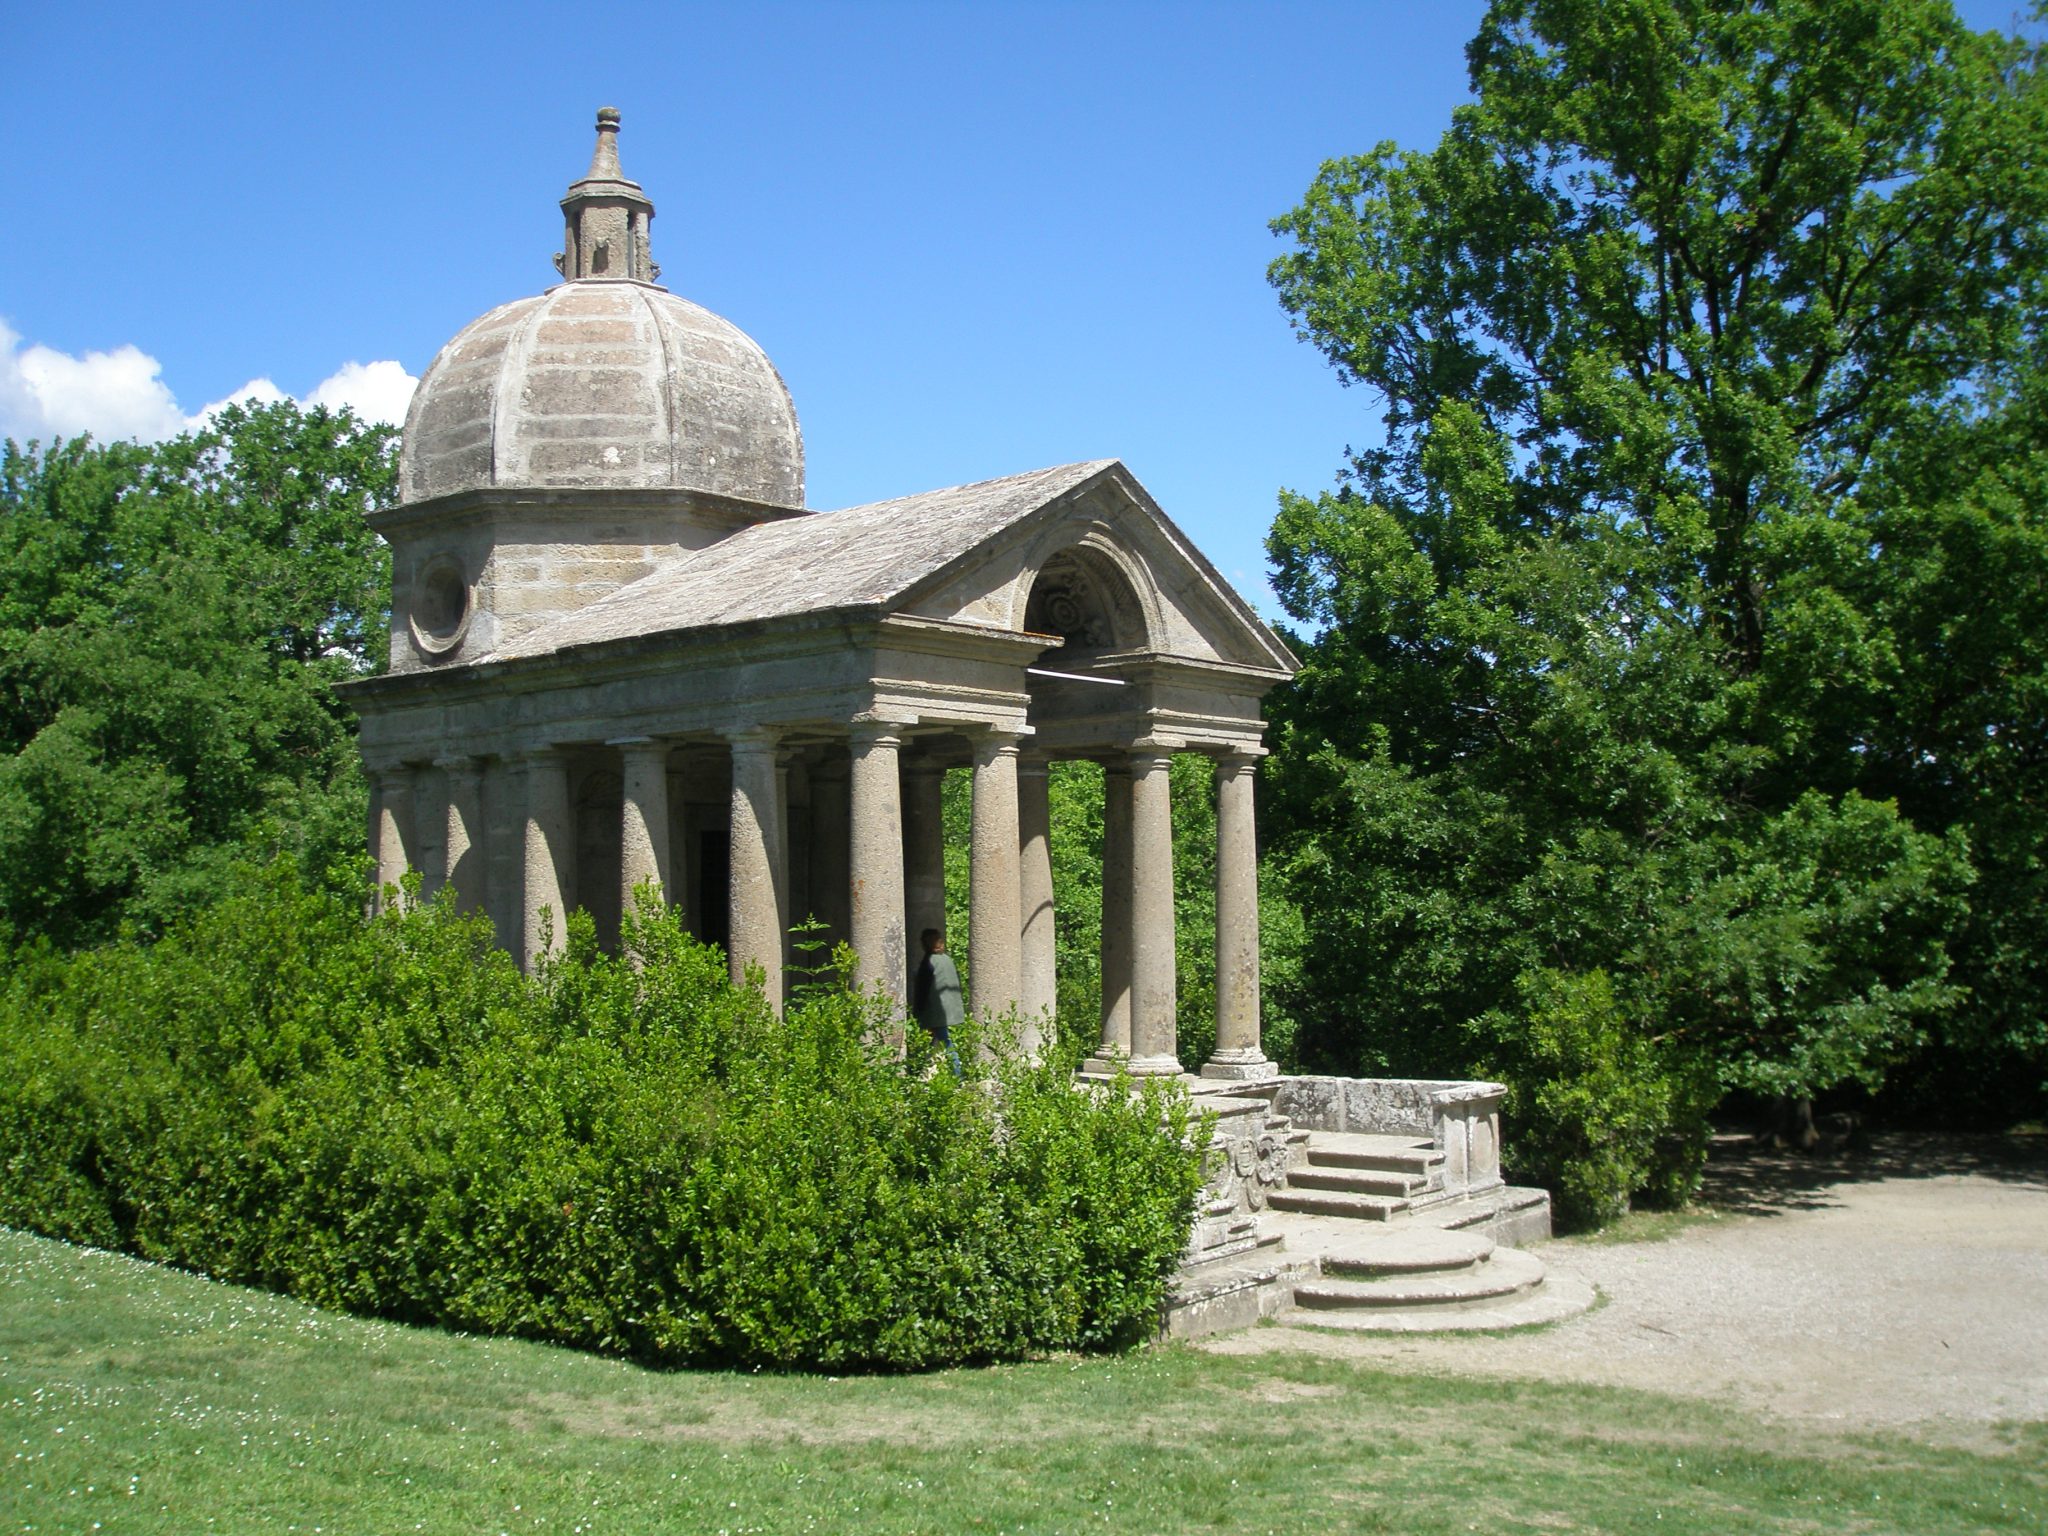 Vicino Orsini built this Temple to honor the memory of his deceased wife Giulia Farnese.